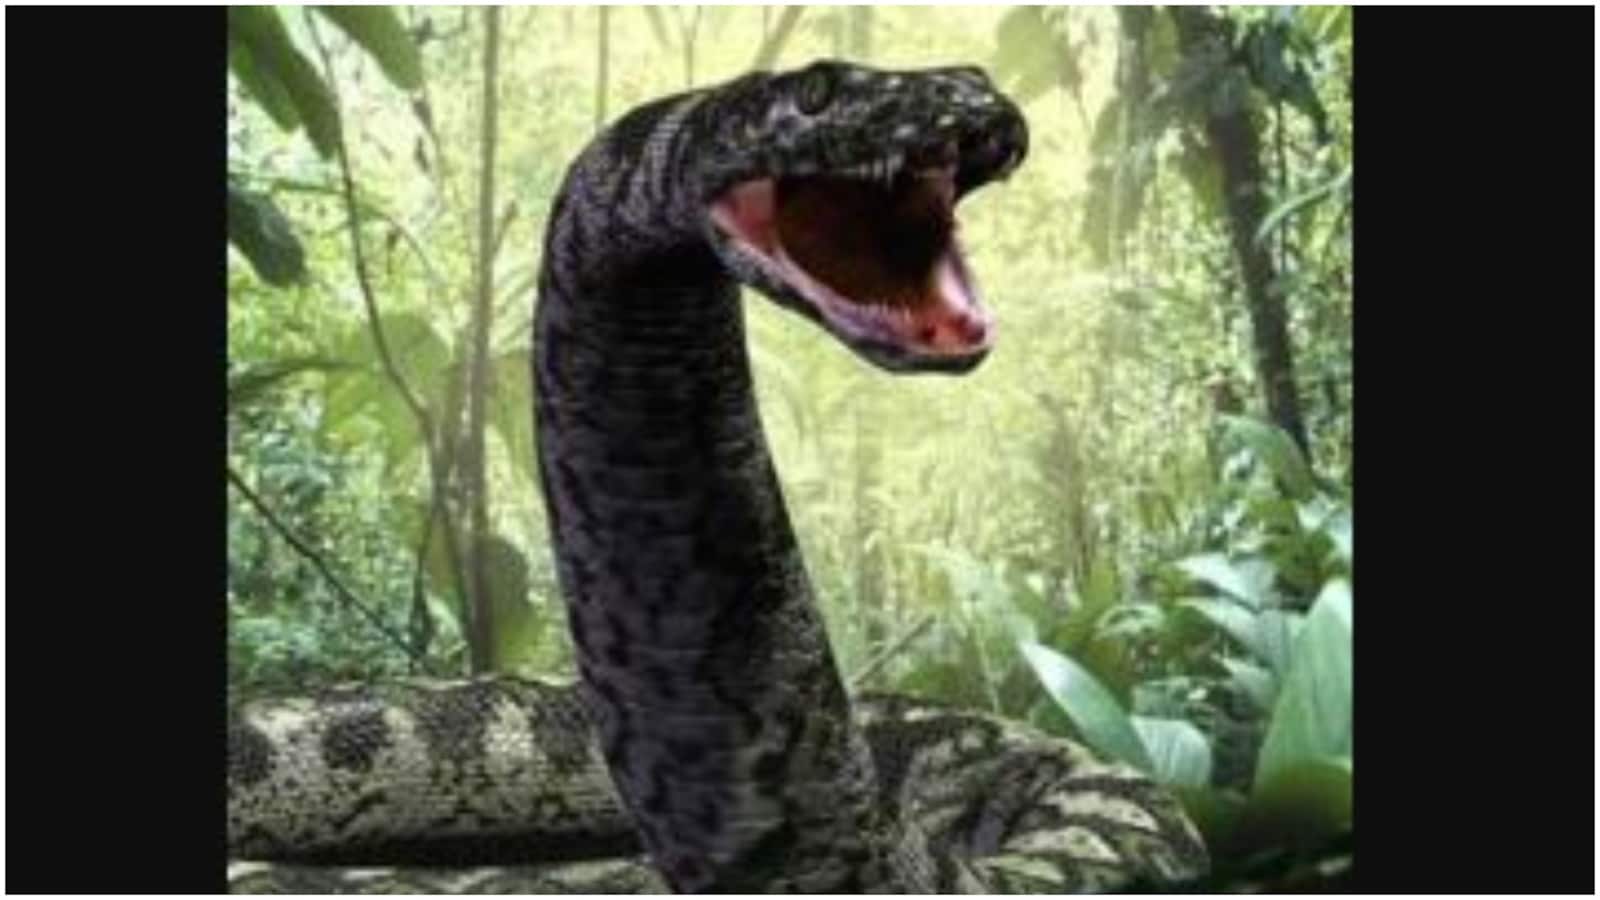 All about Titanoboa, giant extinct snake species made famous by viral  TikTok video